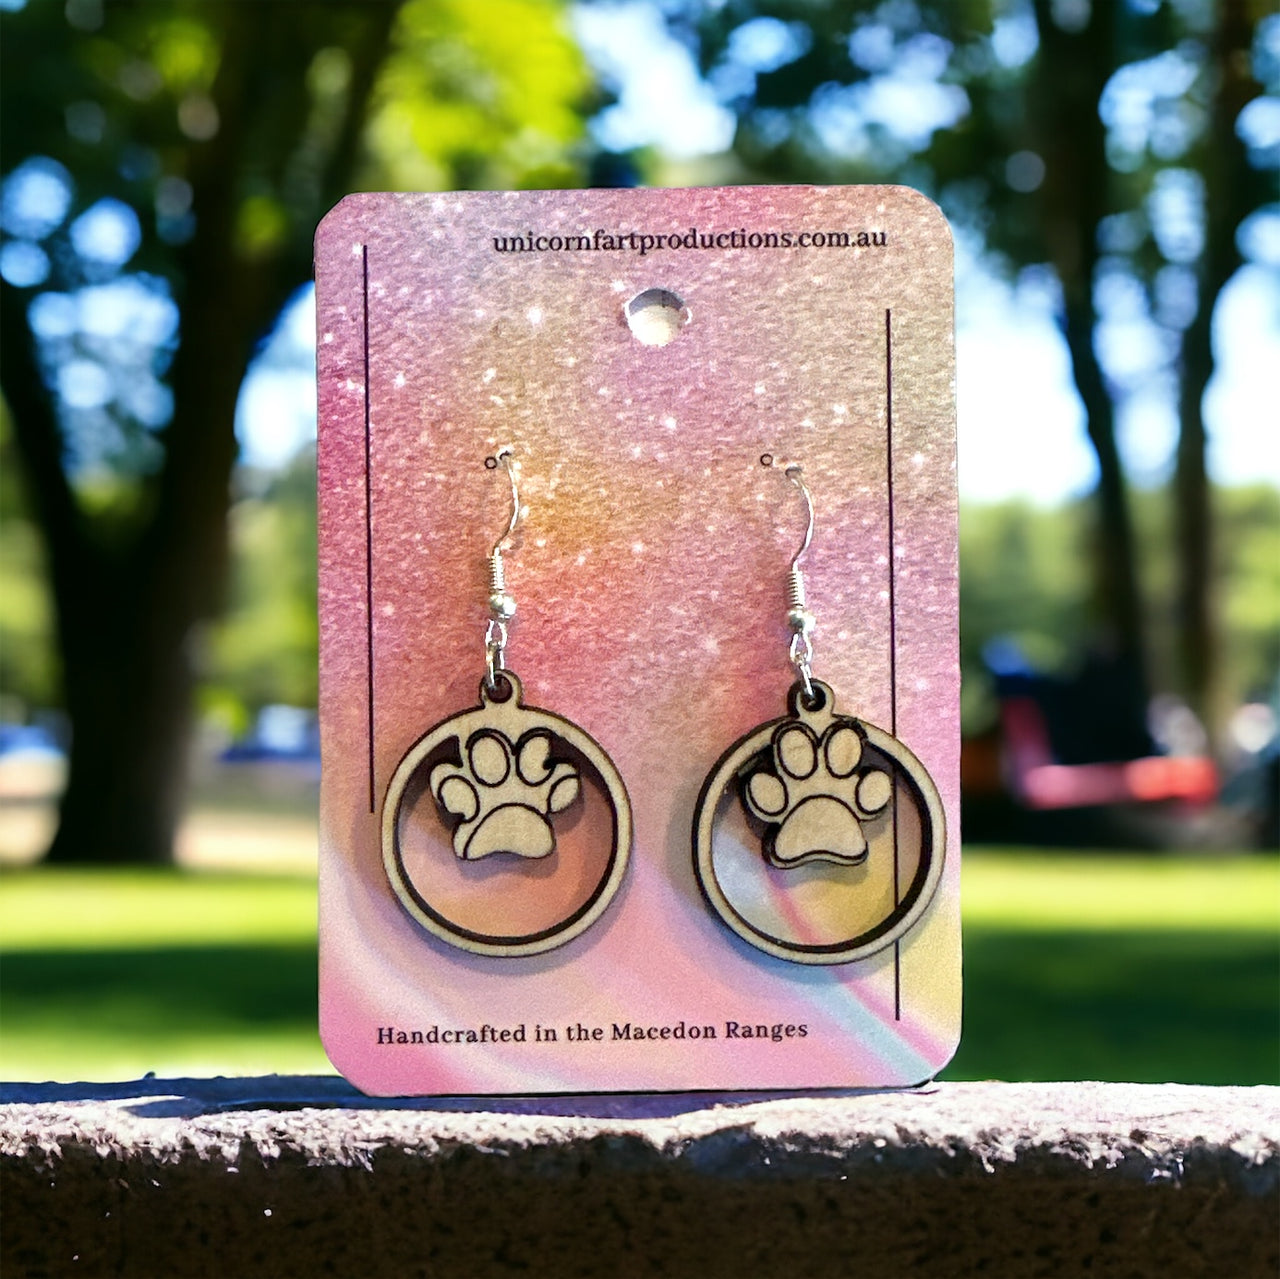 Wooden Handmade earrings crafted from sustainable timber - Dog Paw